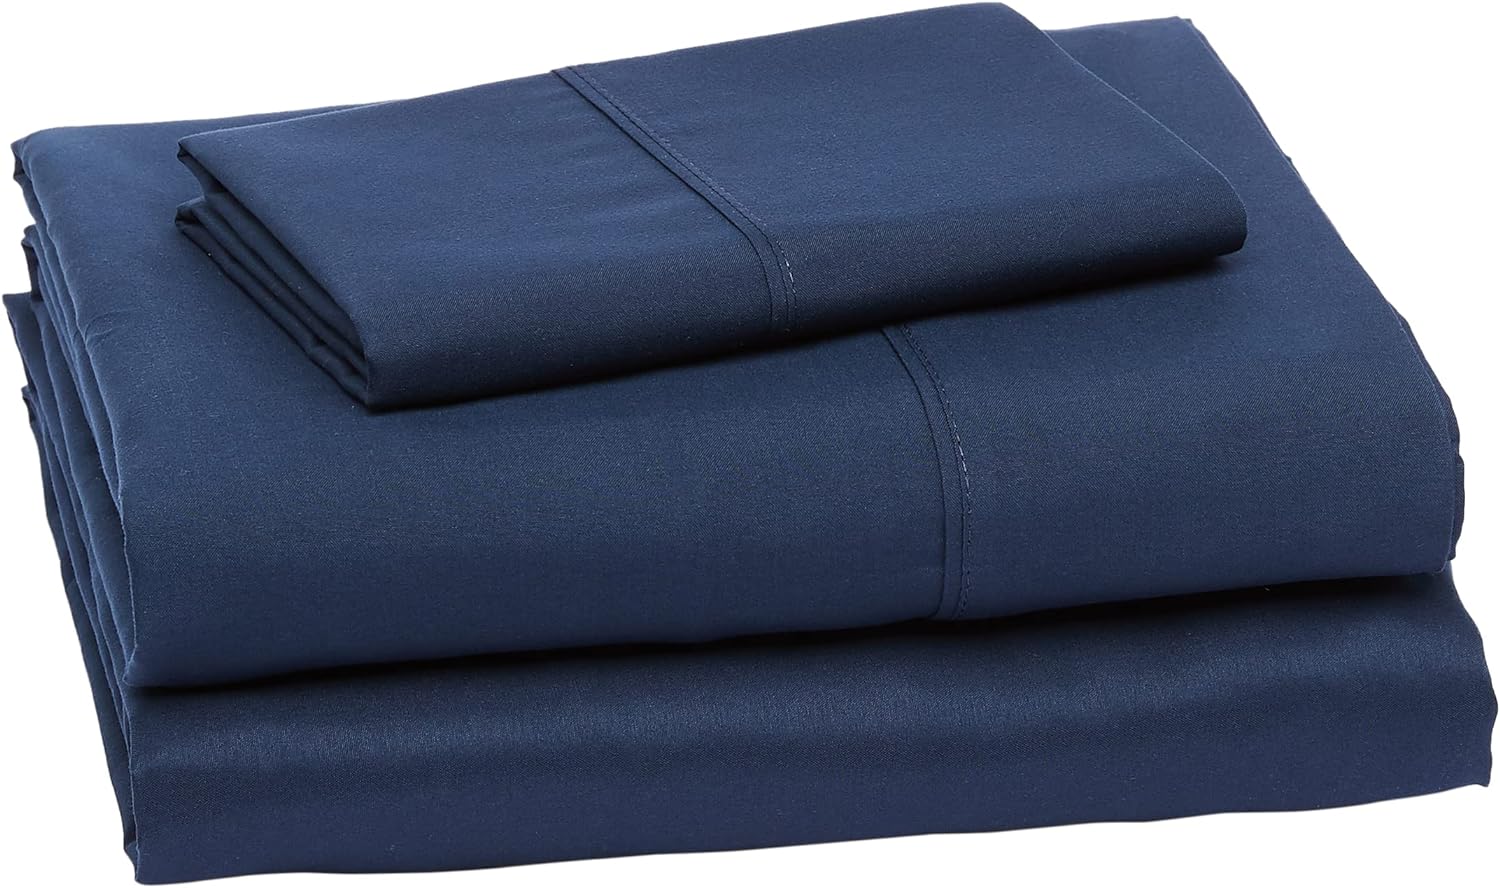 Amazon Basics Lightweight Super Soft Easy Care Microfiber 3-Piece Bed Sheet Set with 14-Inch Deep Pockets, Twin, Navy Blue, Solid